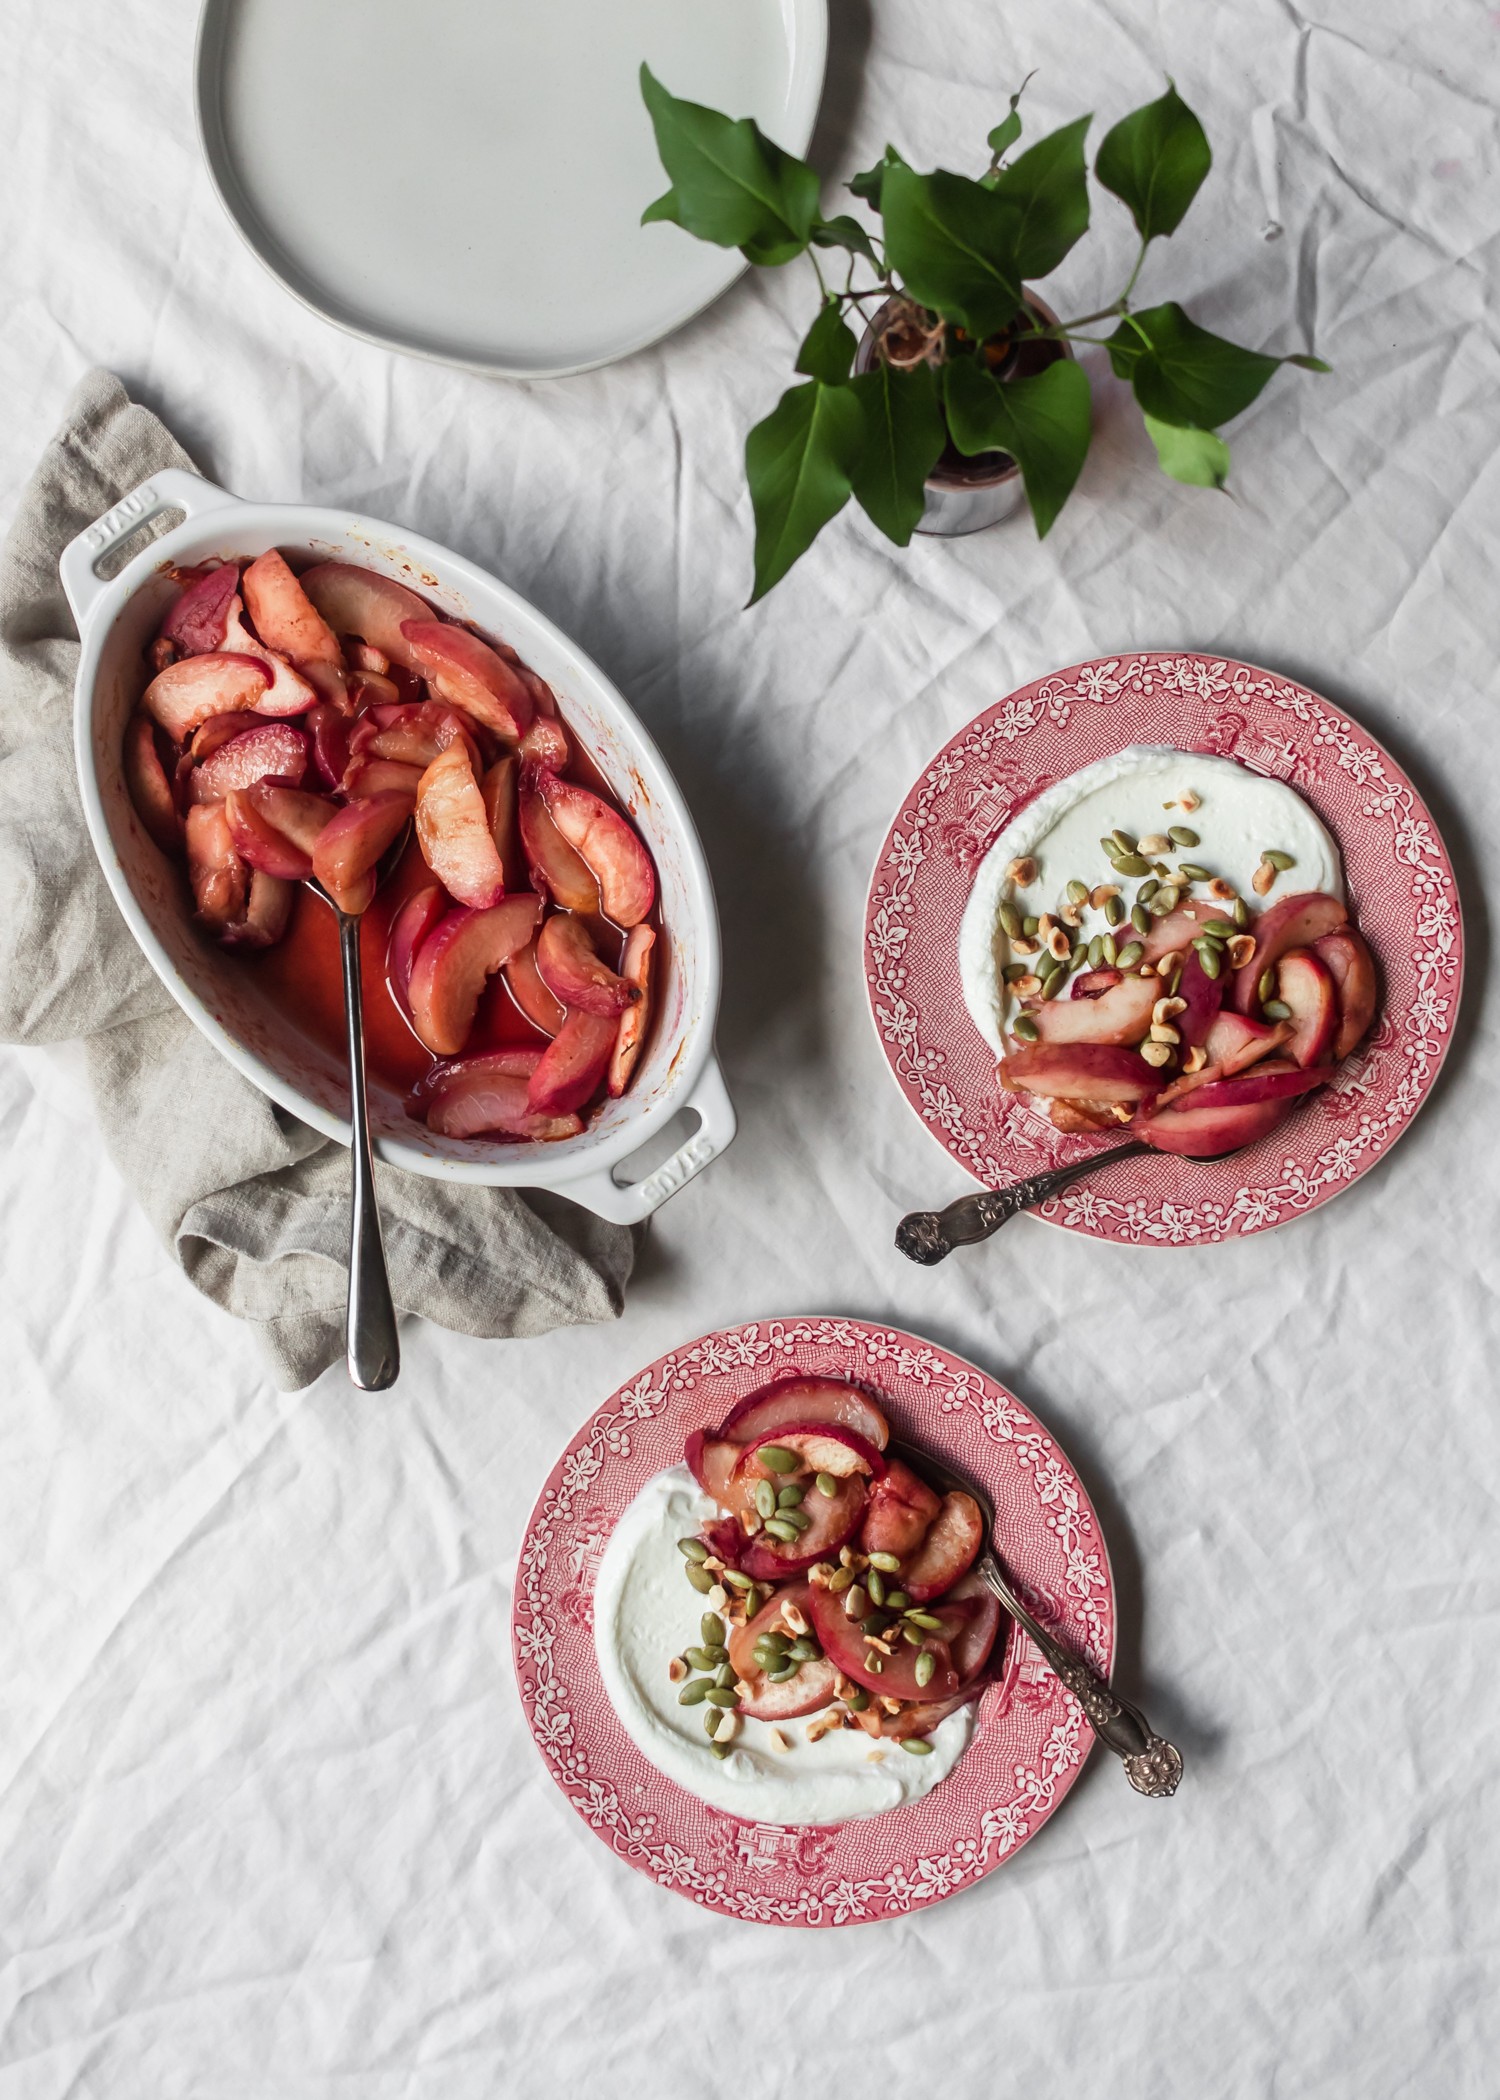 An overhead shot of two red plates with roasted peaches and yogurt on a white linen next to a roasting pan with more peaches and a vase of greenery.